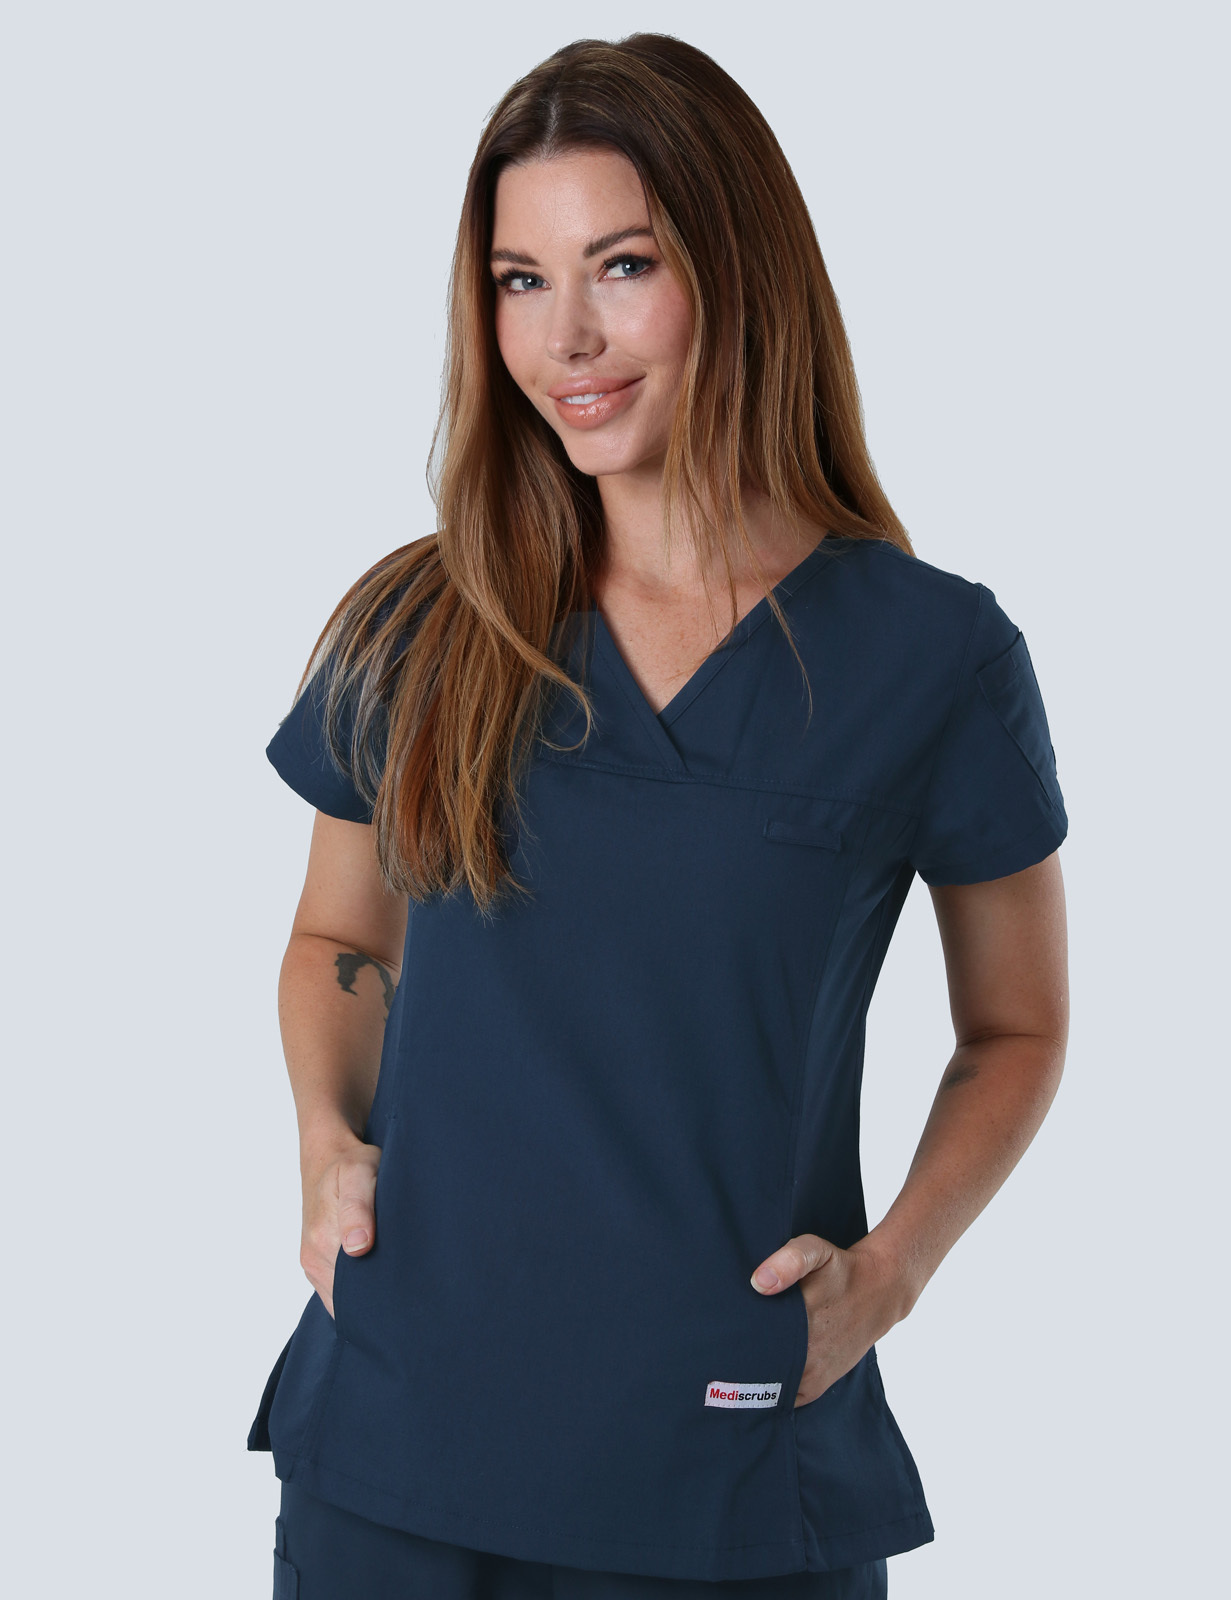 PAH - Cardiac Scientist (Women's Fit Solid Scrub Top and Cargo Pants in Navy incl Logos)